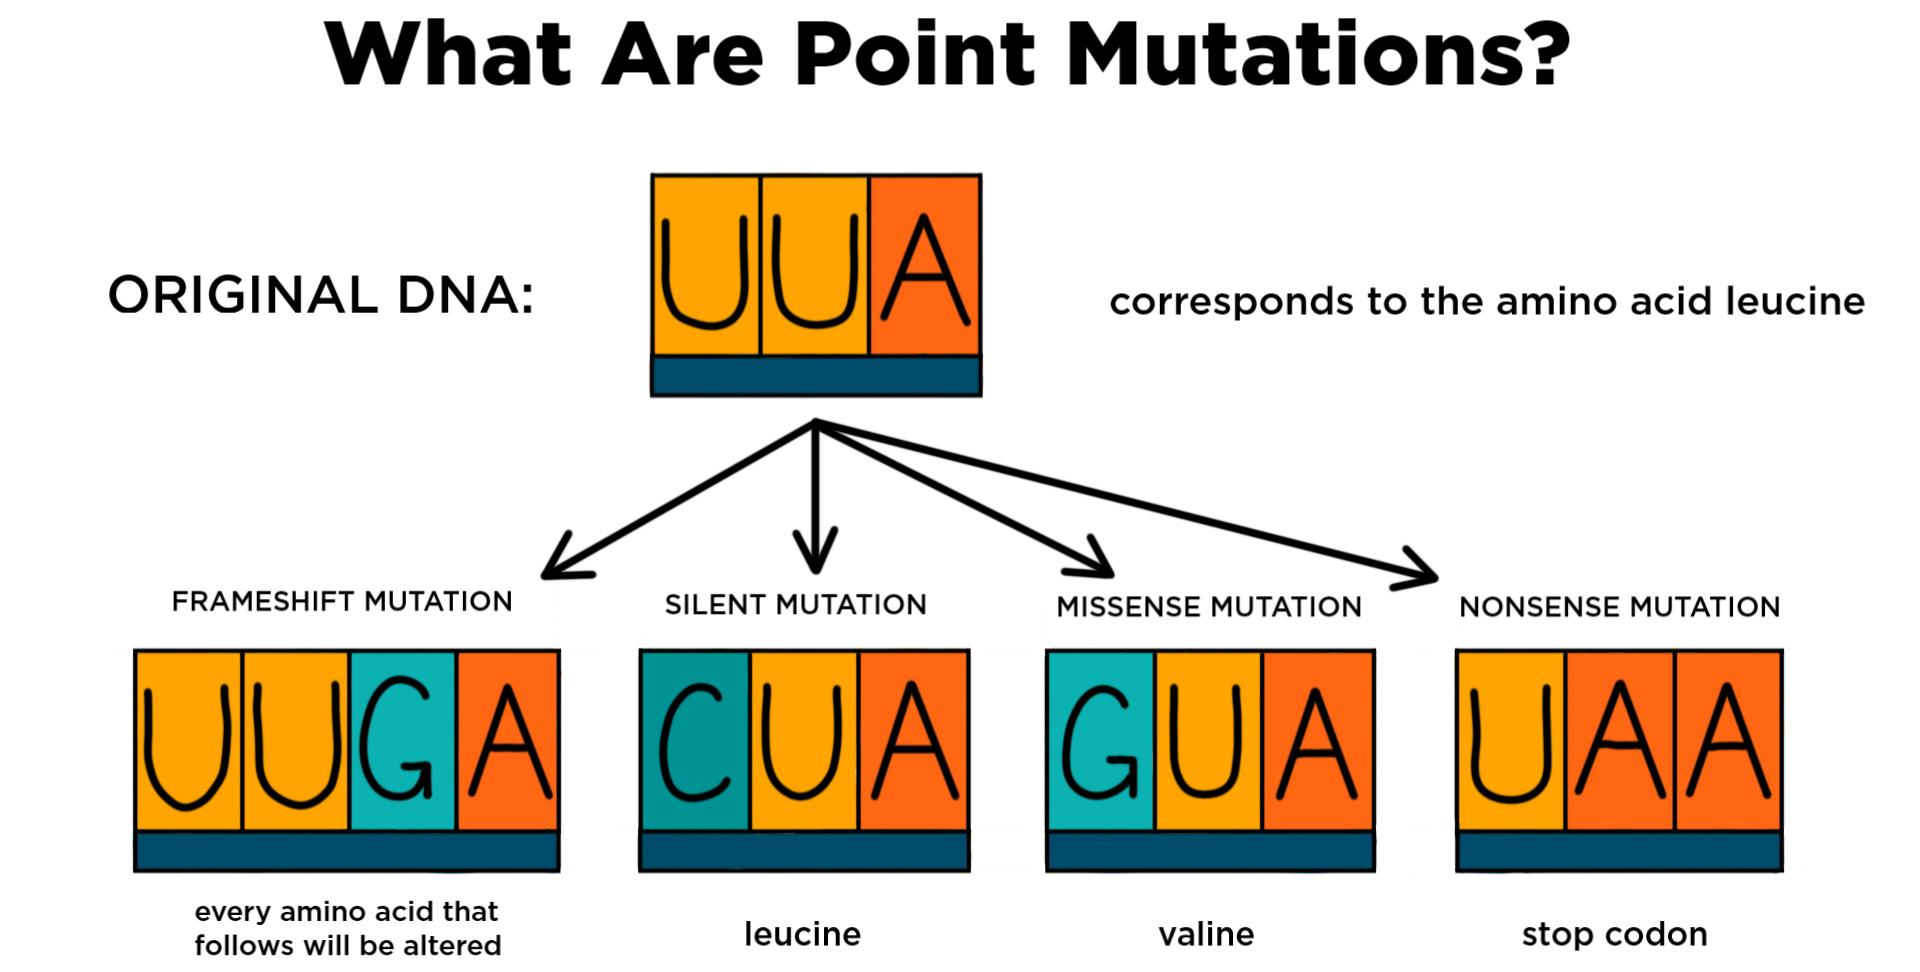 What is a point mutation?